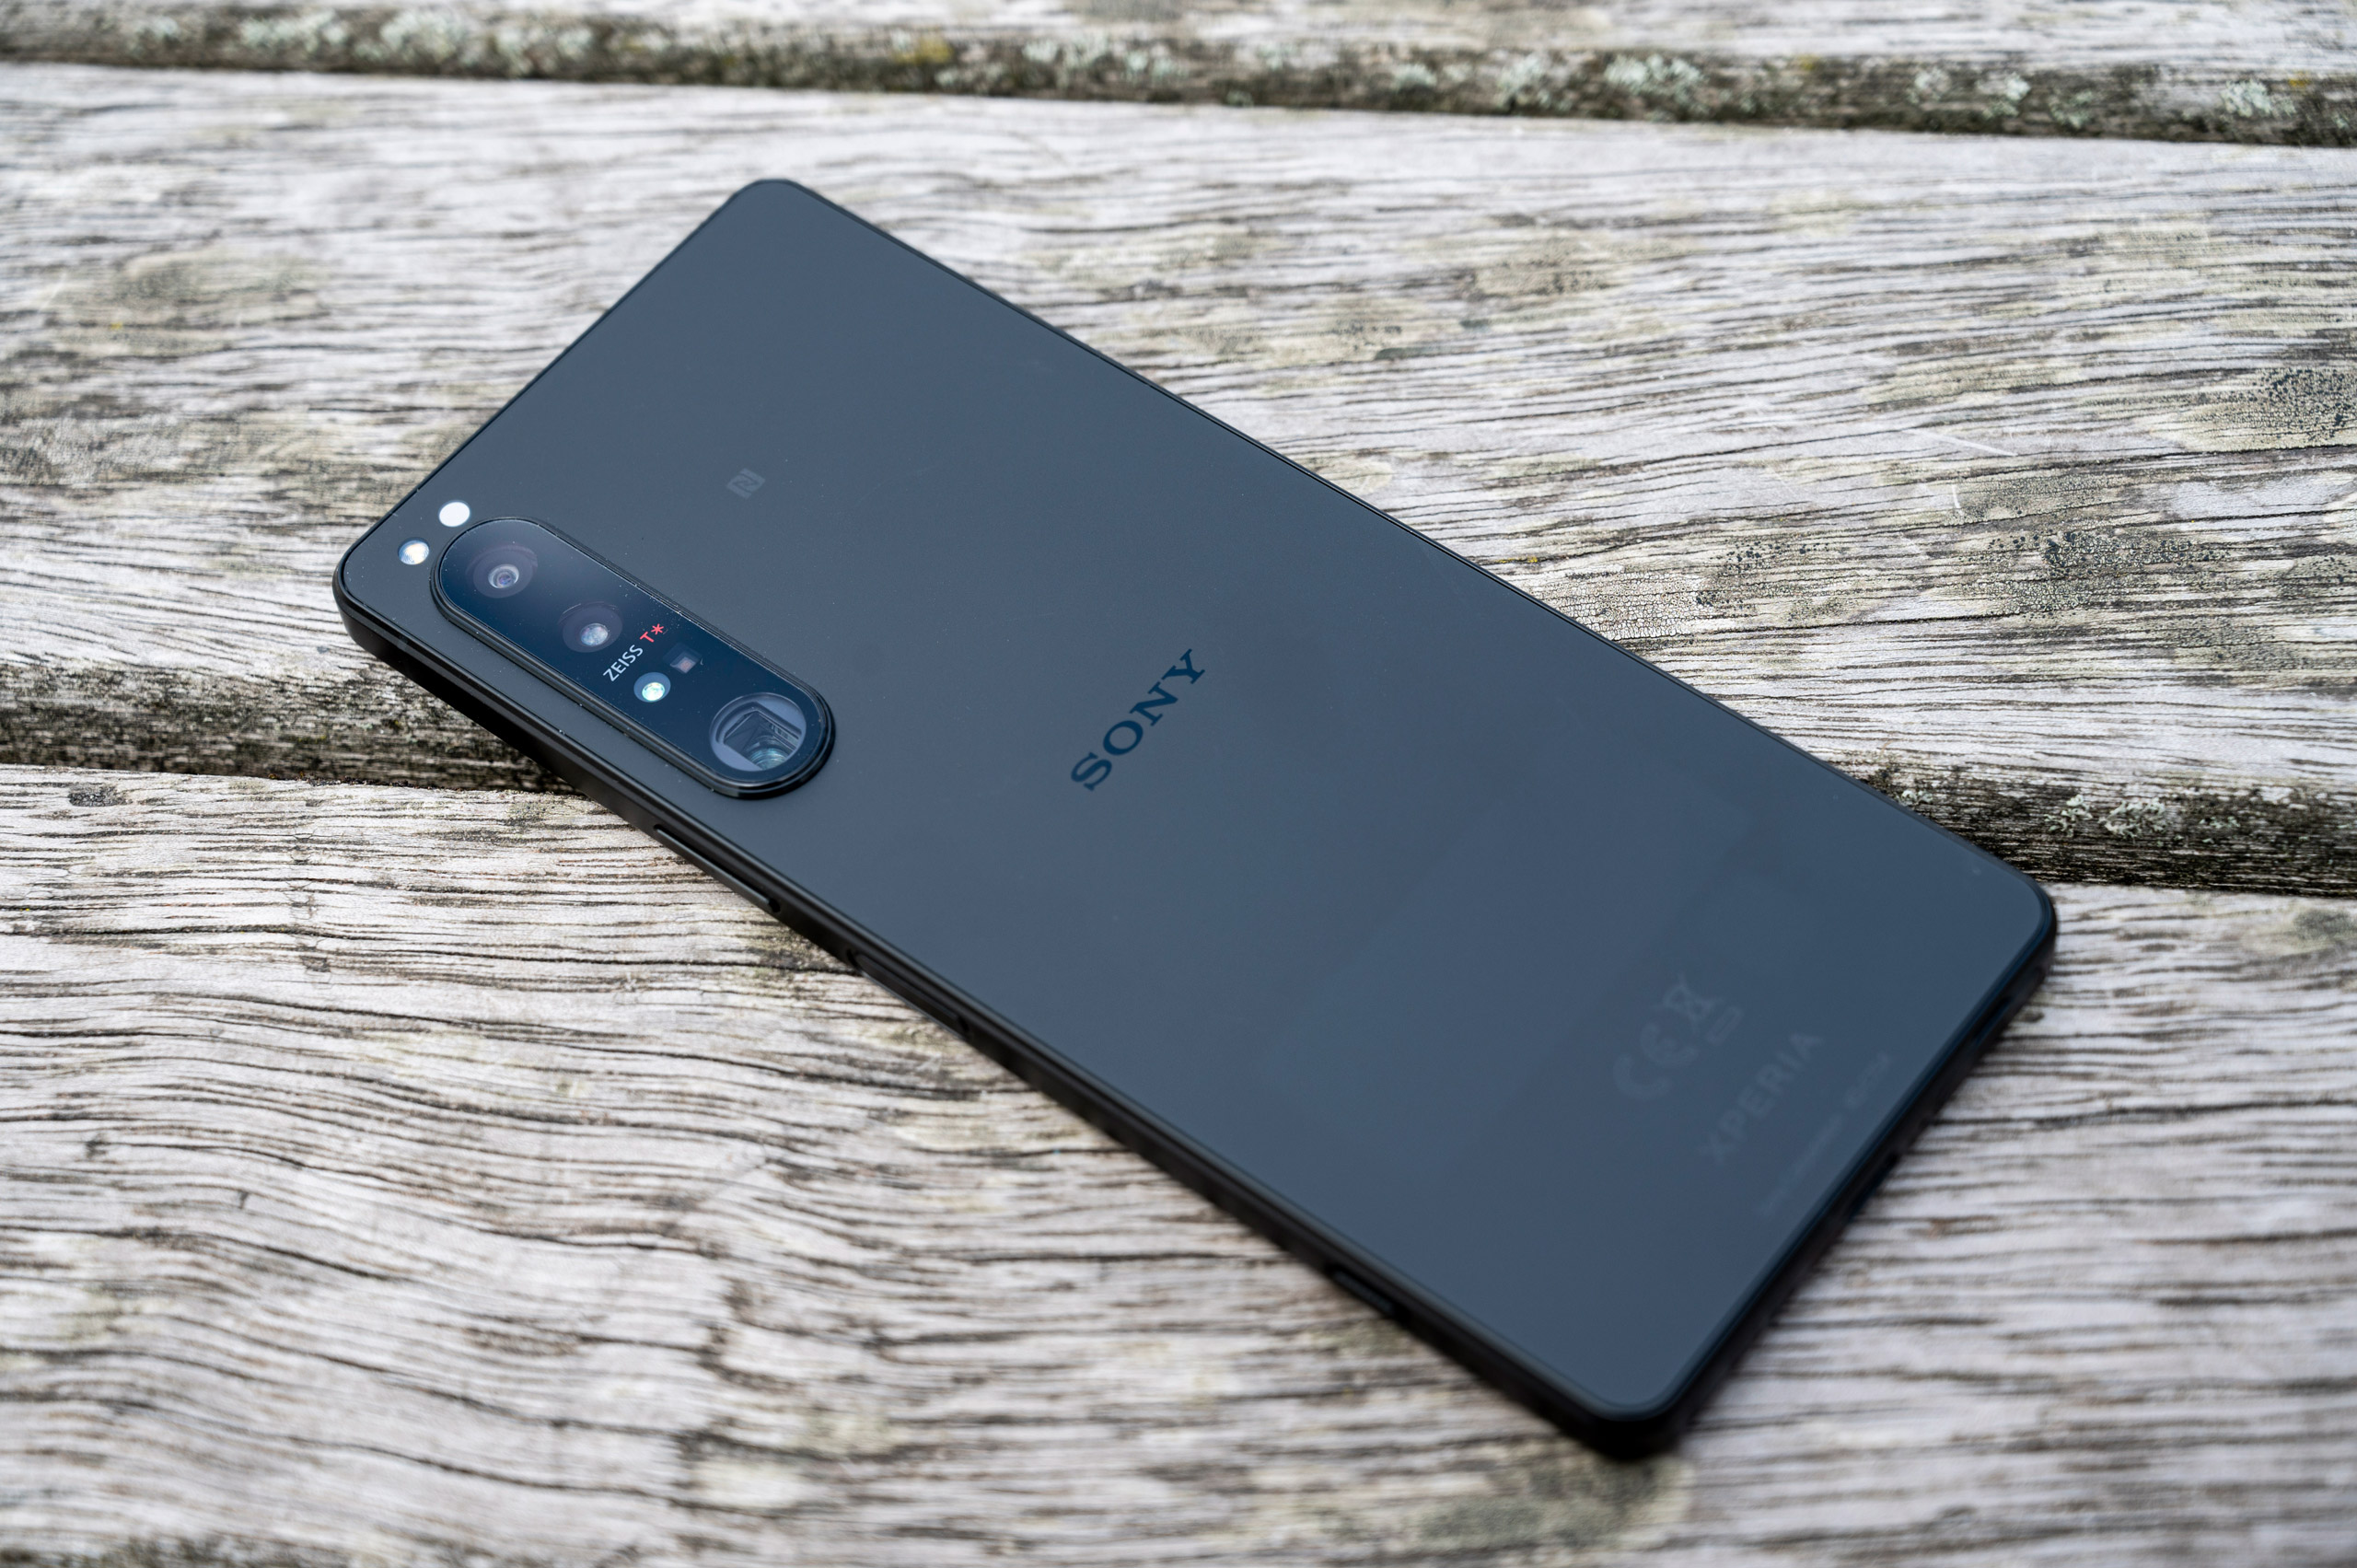 Sony Xperia 1 IV rear, with cameras, AD